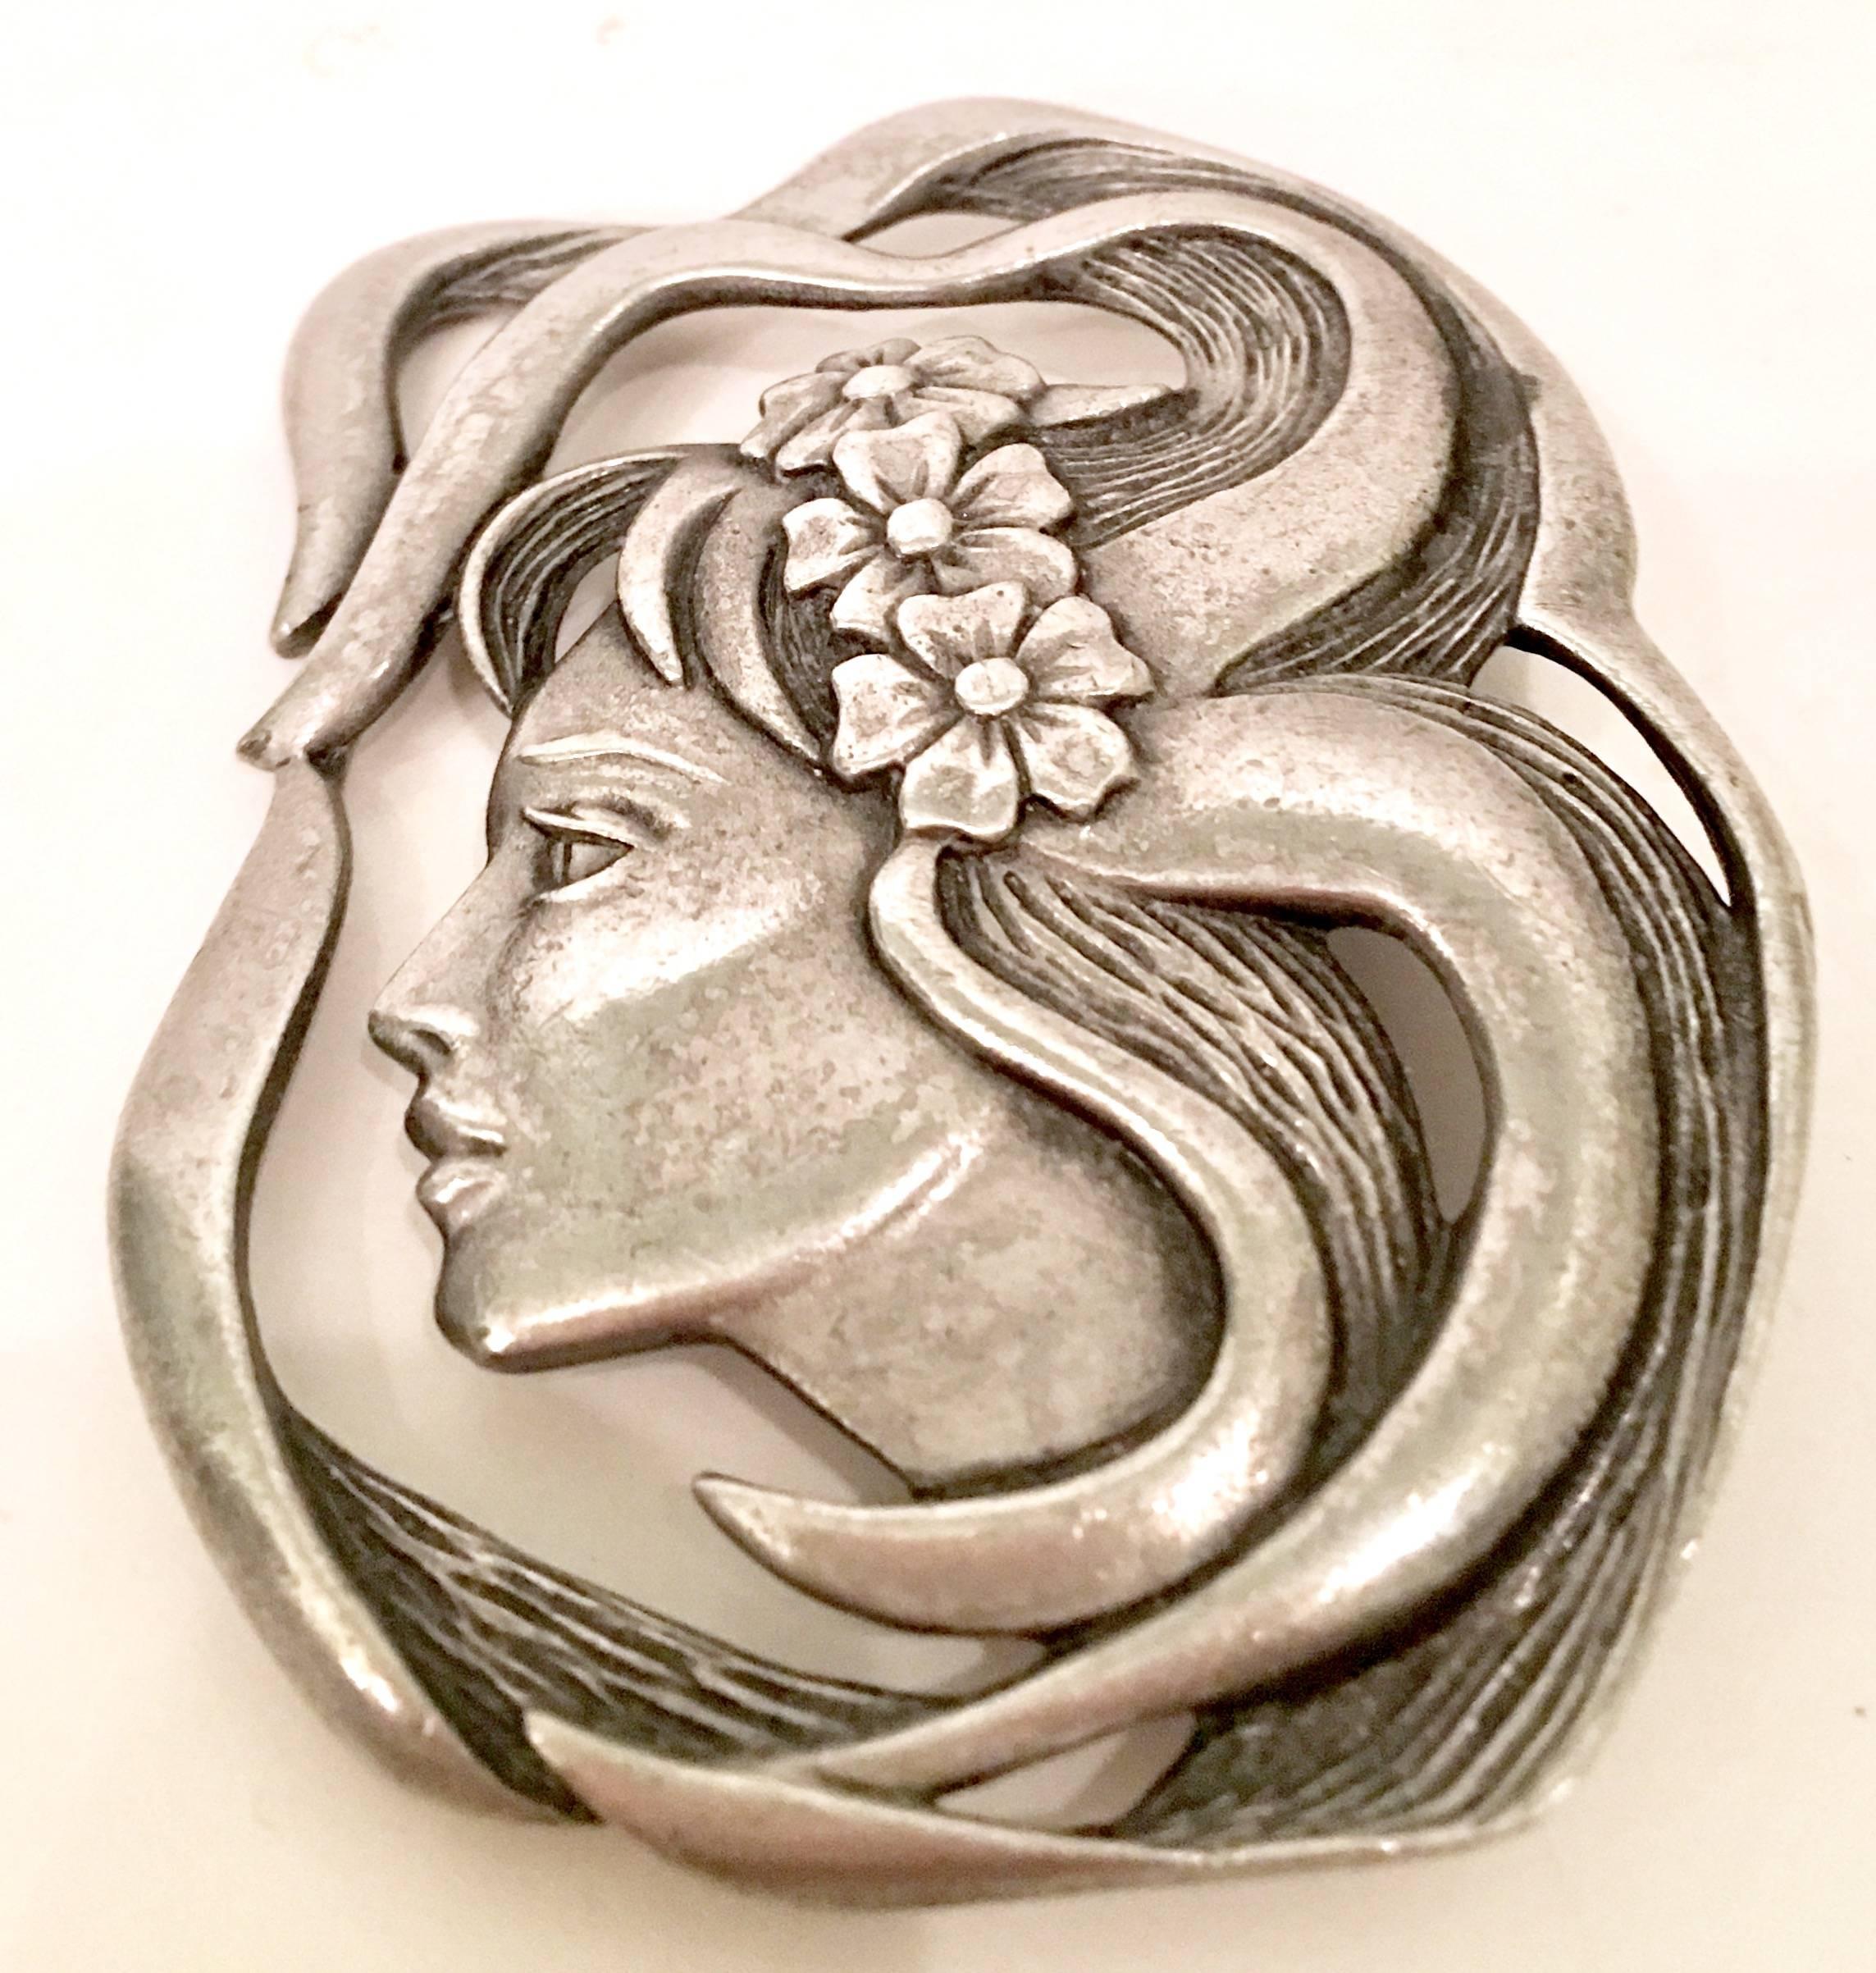 Vintage Silver Pewter Art Nouveau Style Lady with Flowers In Her Hair Brooch Signed, JJ.
